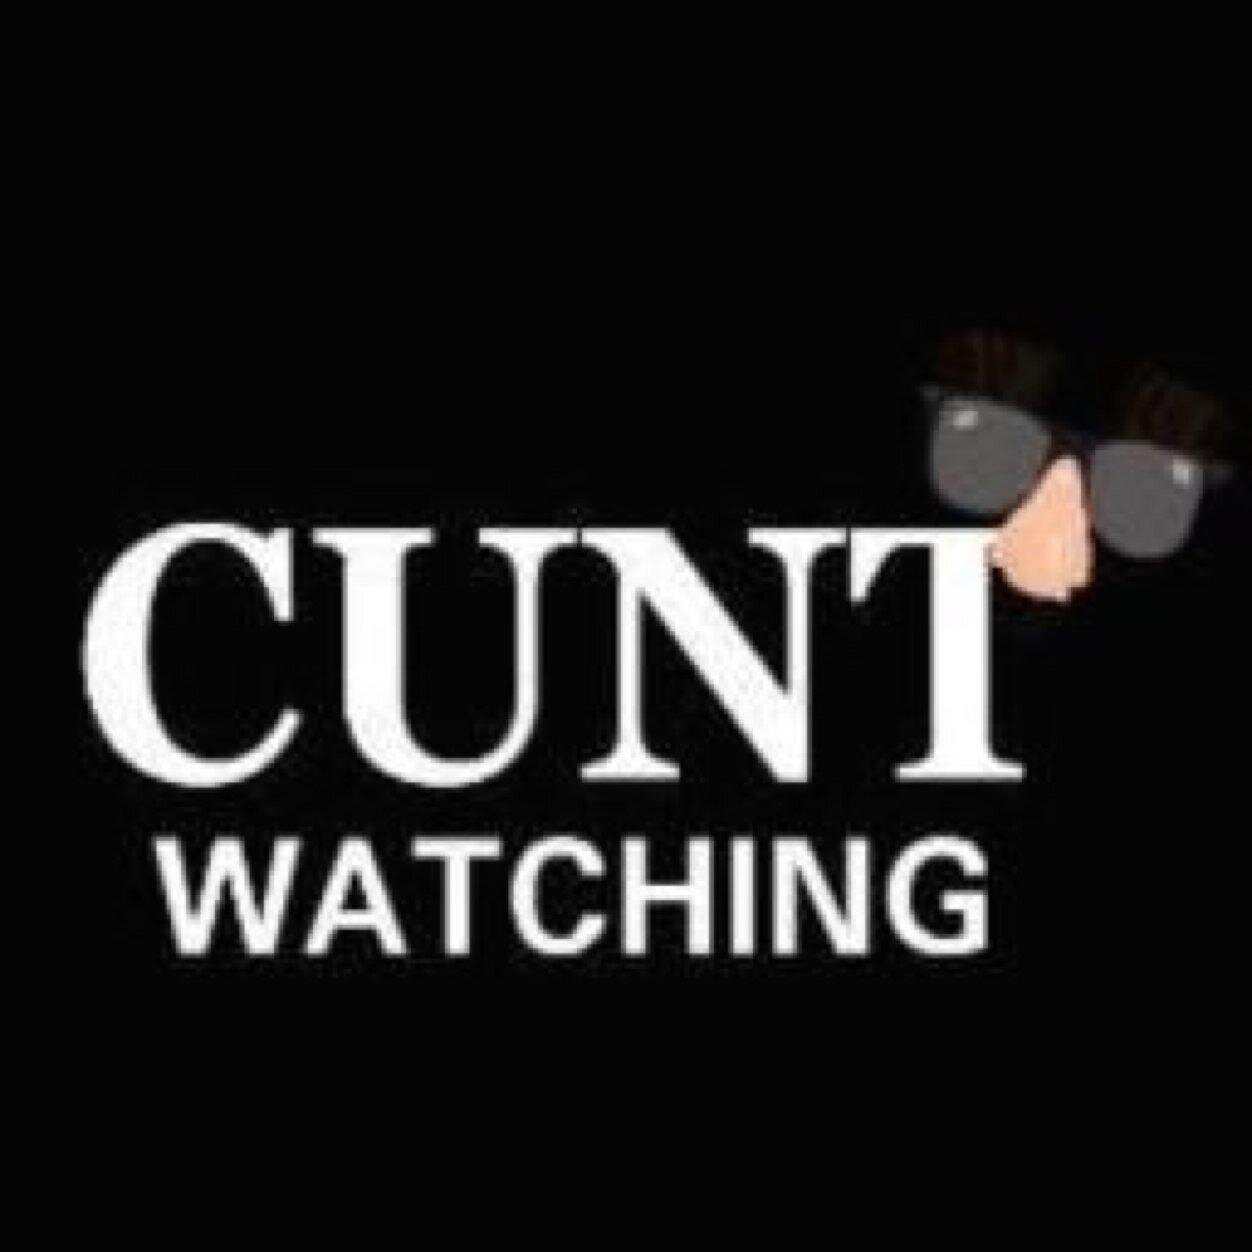 The original owners of cuntswatching before the sellouts. No teensdigest or betting links, just cunts!